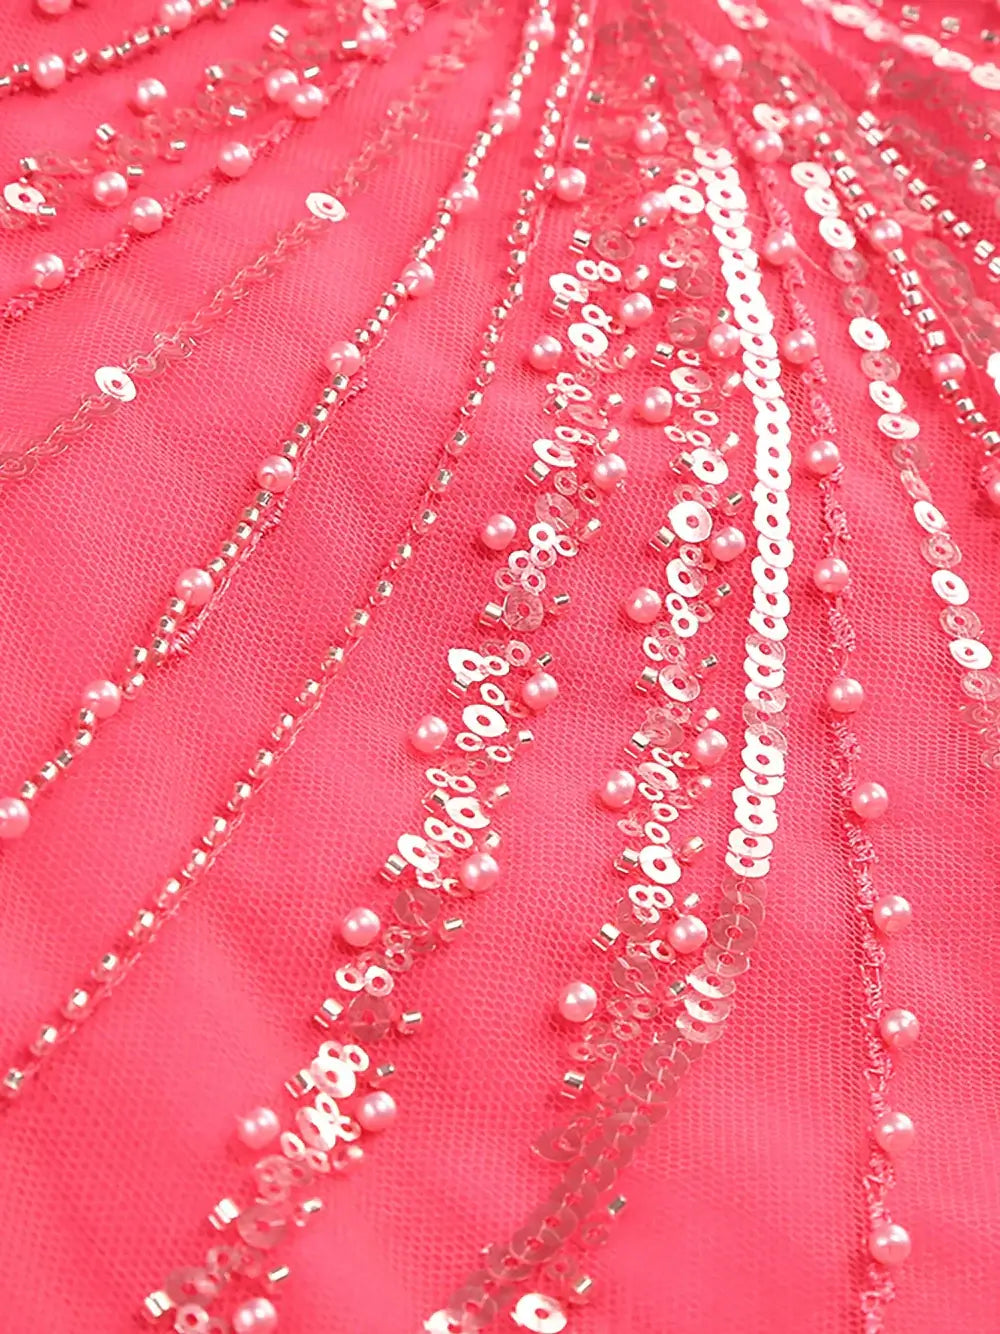 Sparkling Pink Maxi Dress with Rhinestone Detailing and One Shoulder Design